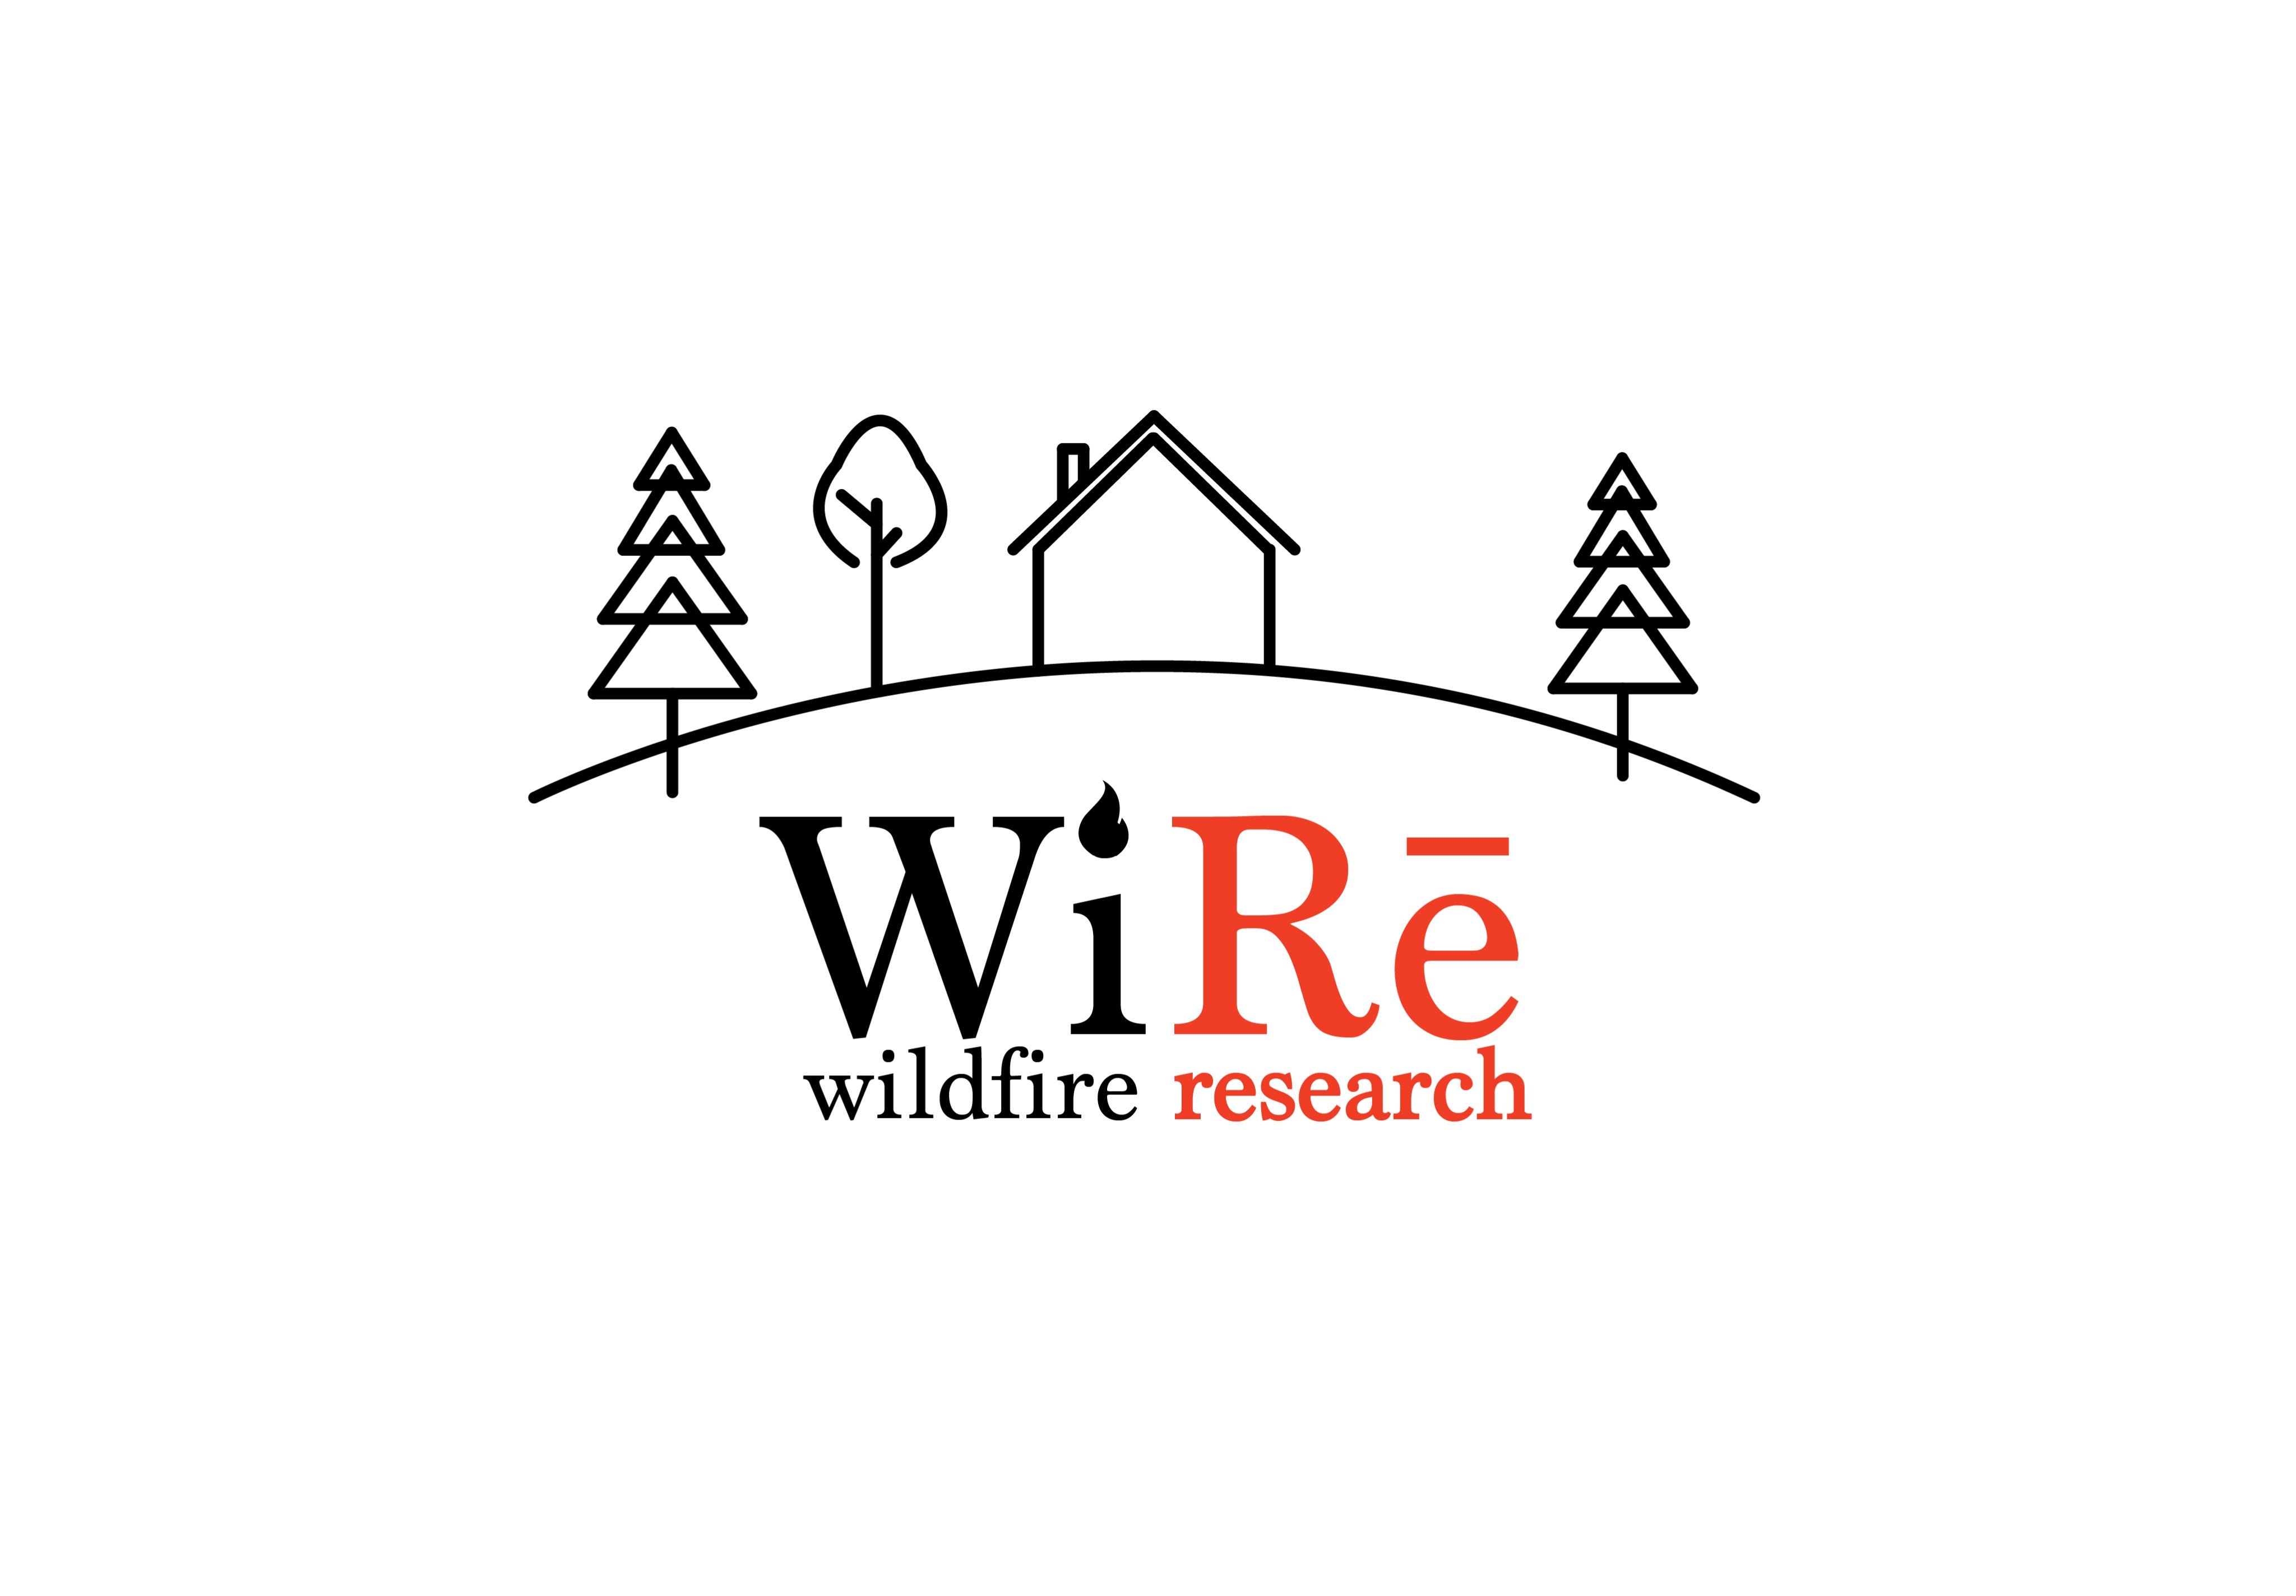 An interdisciplinary research group focused on community adaptedness to wildland fire.